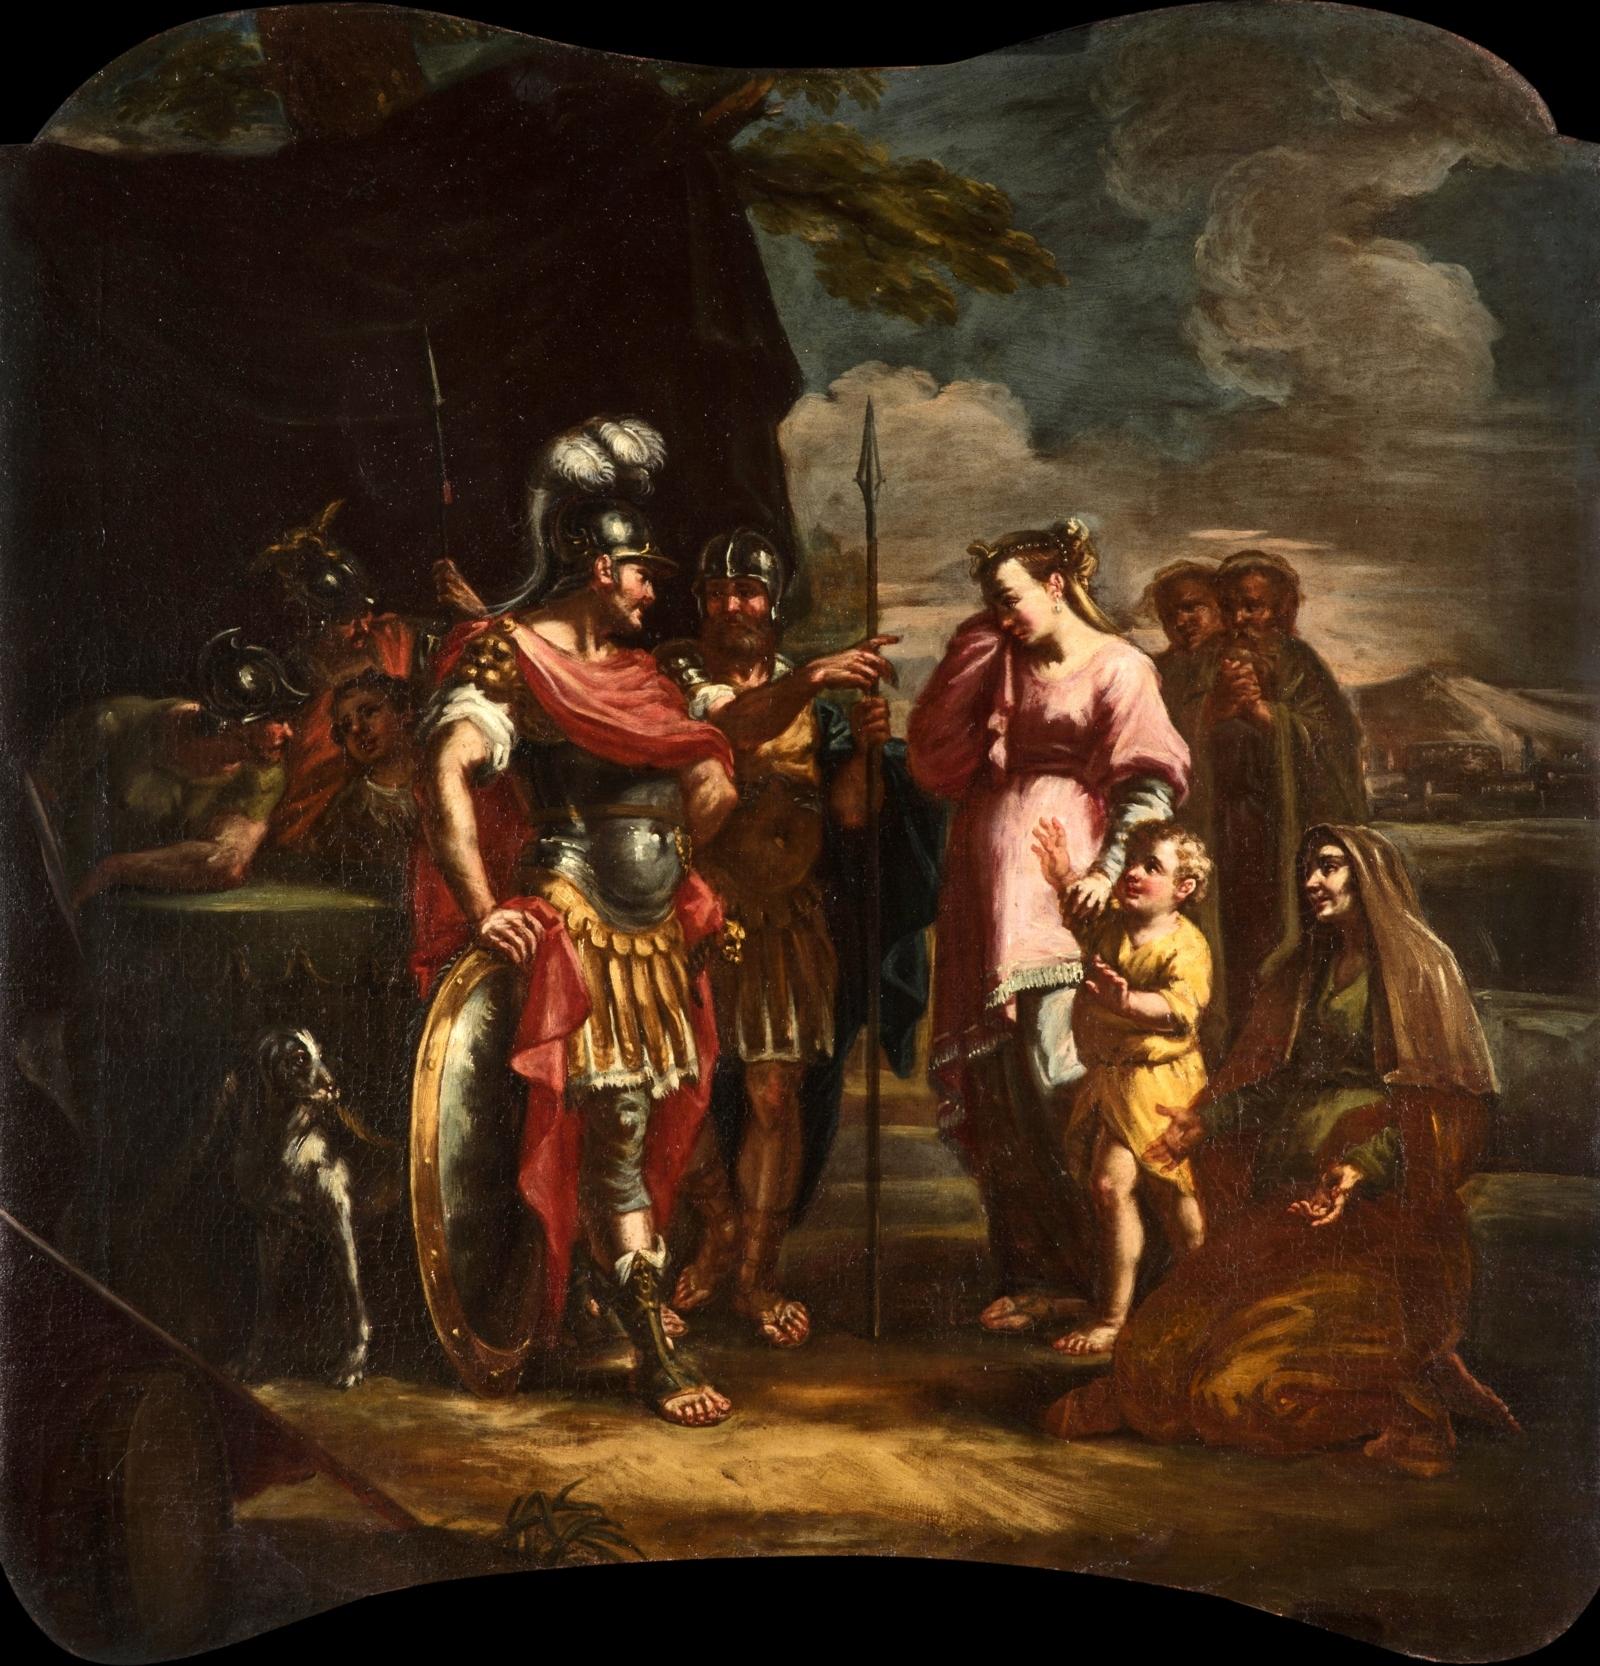 Baroque 18th Century, Pair of Italian Paintings with Stories of Rome